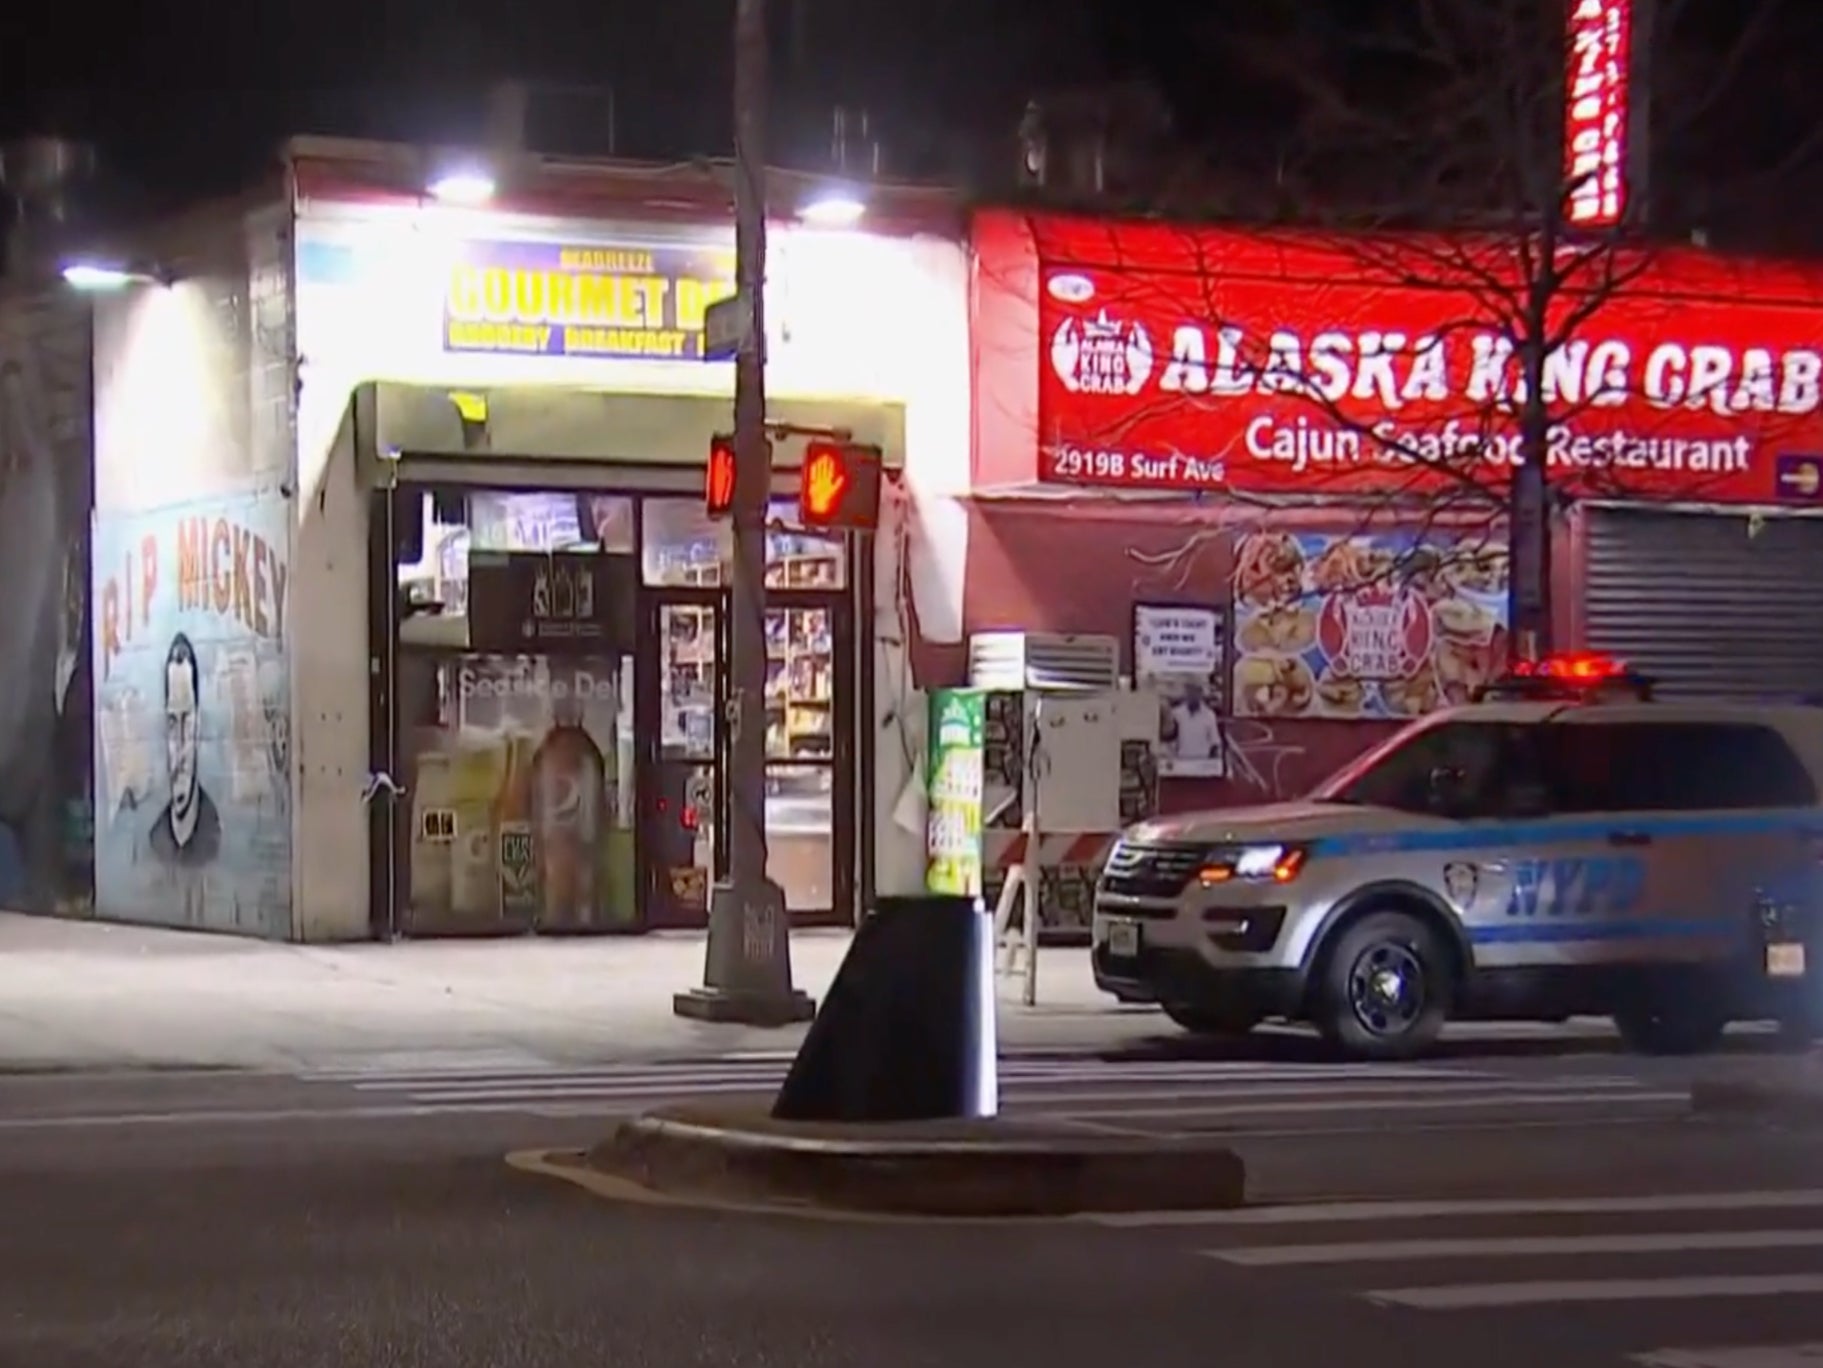 A deli in Brooklyn where a seven-year-old was injured, police say